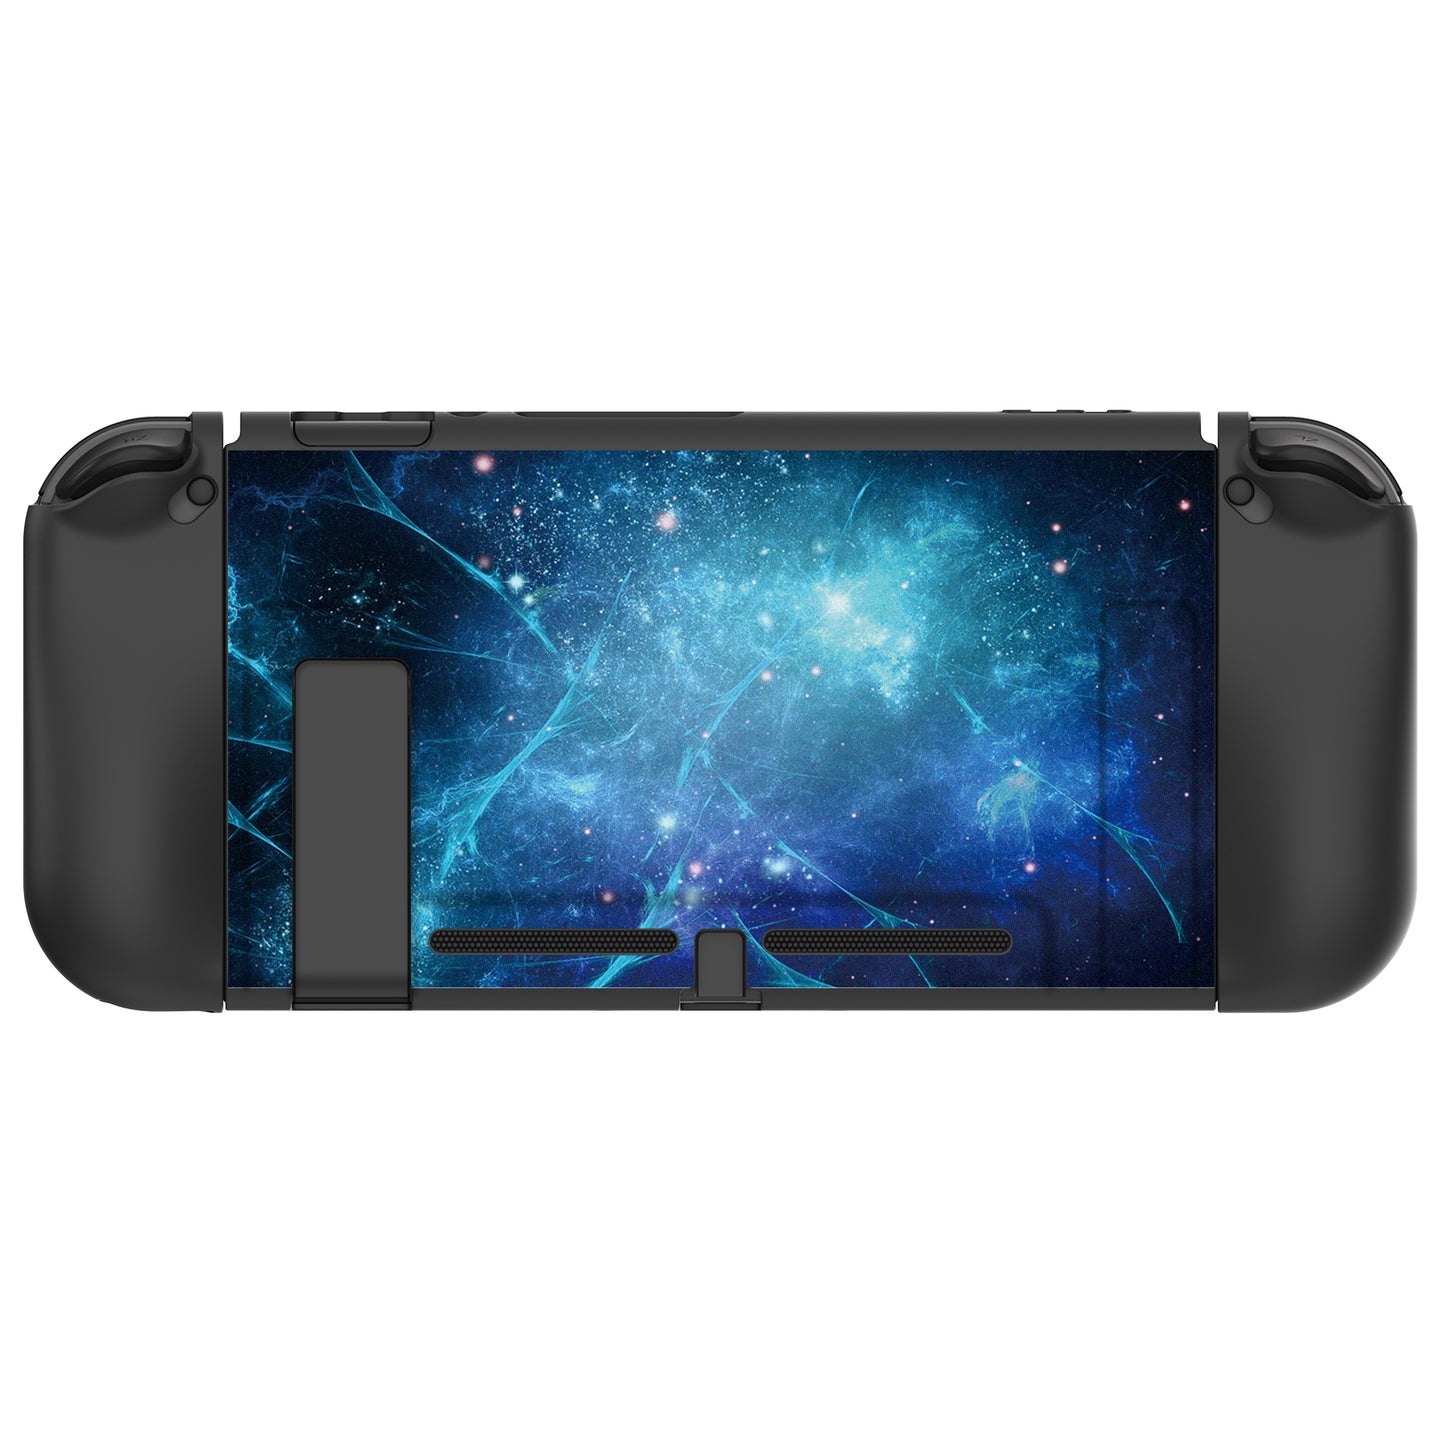 PlayVital Blue Nebula Protective Case for NS Switch, Soft TPU Slim Case Cover for NS Switch Console with Colorful ABXY Direction Button Caps - NTU6014G2